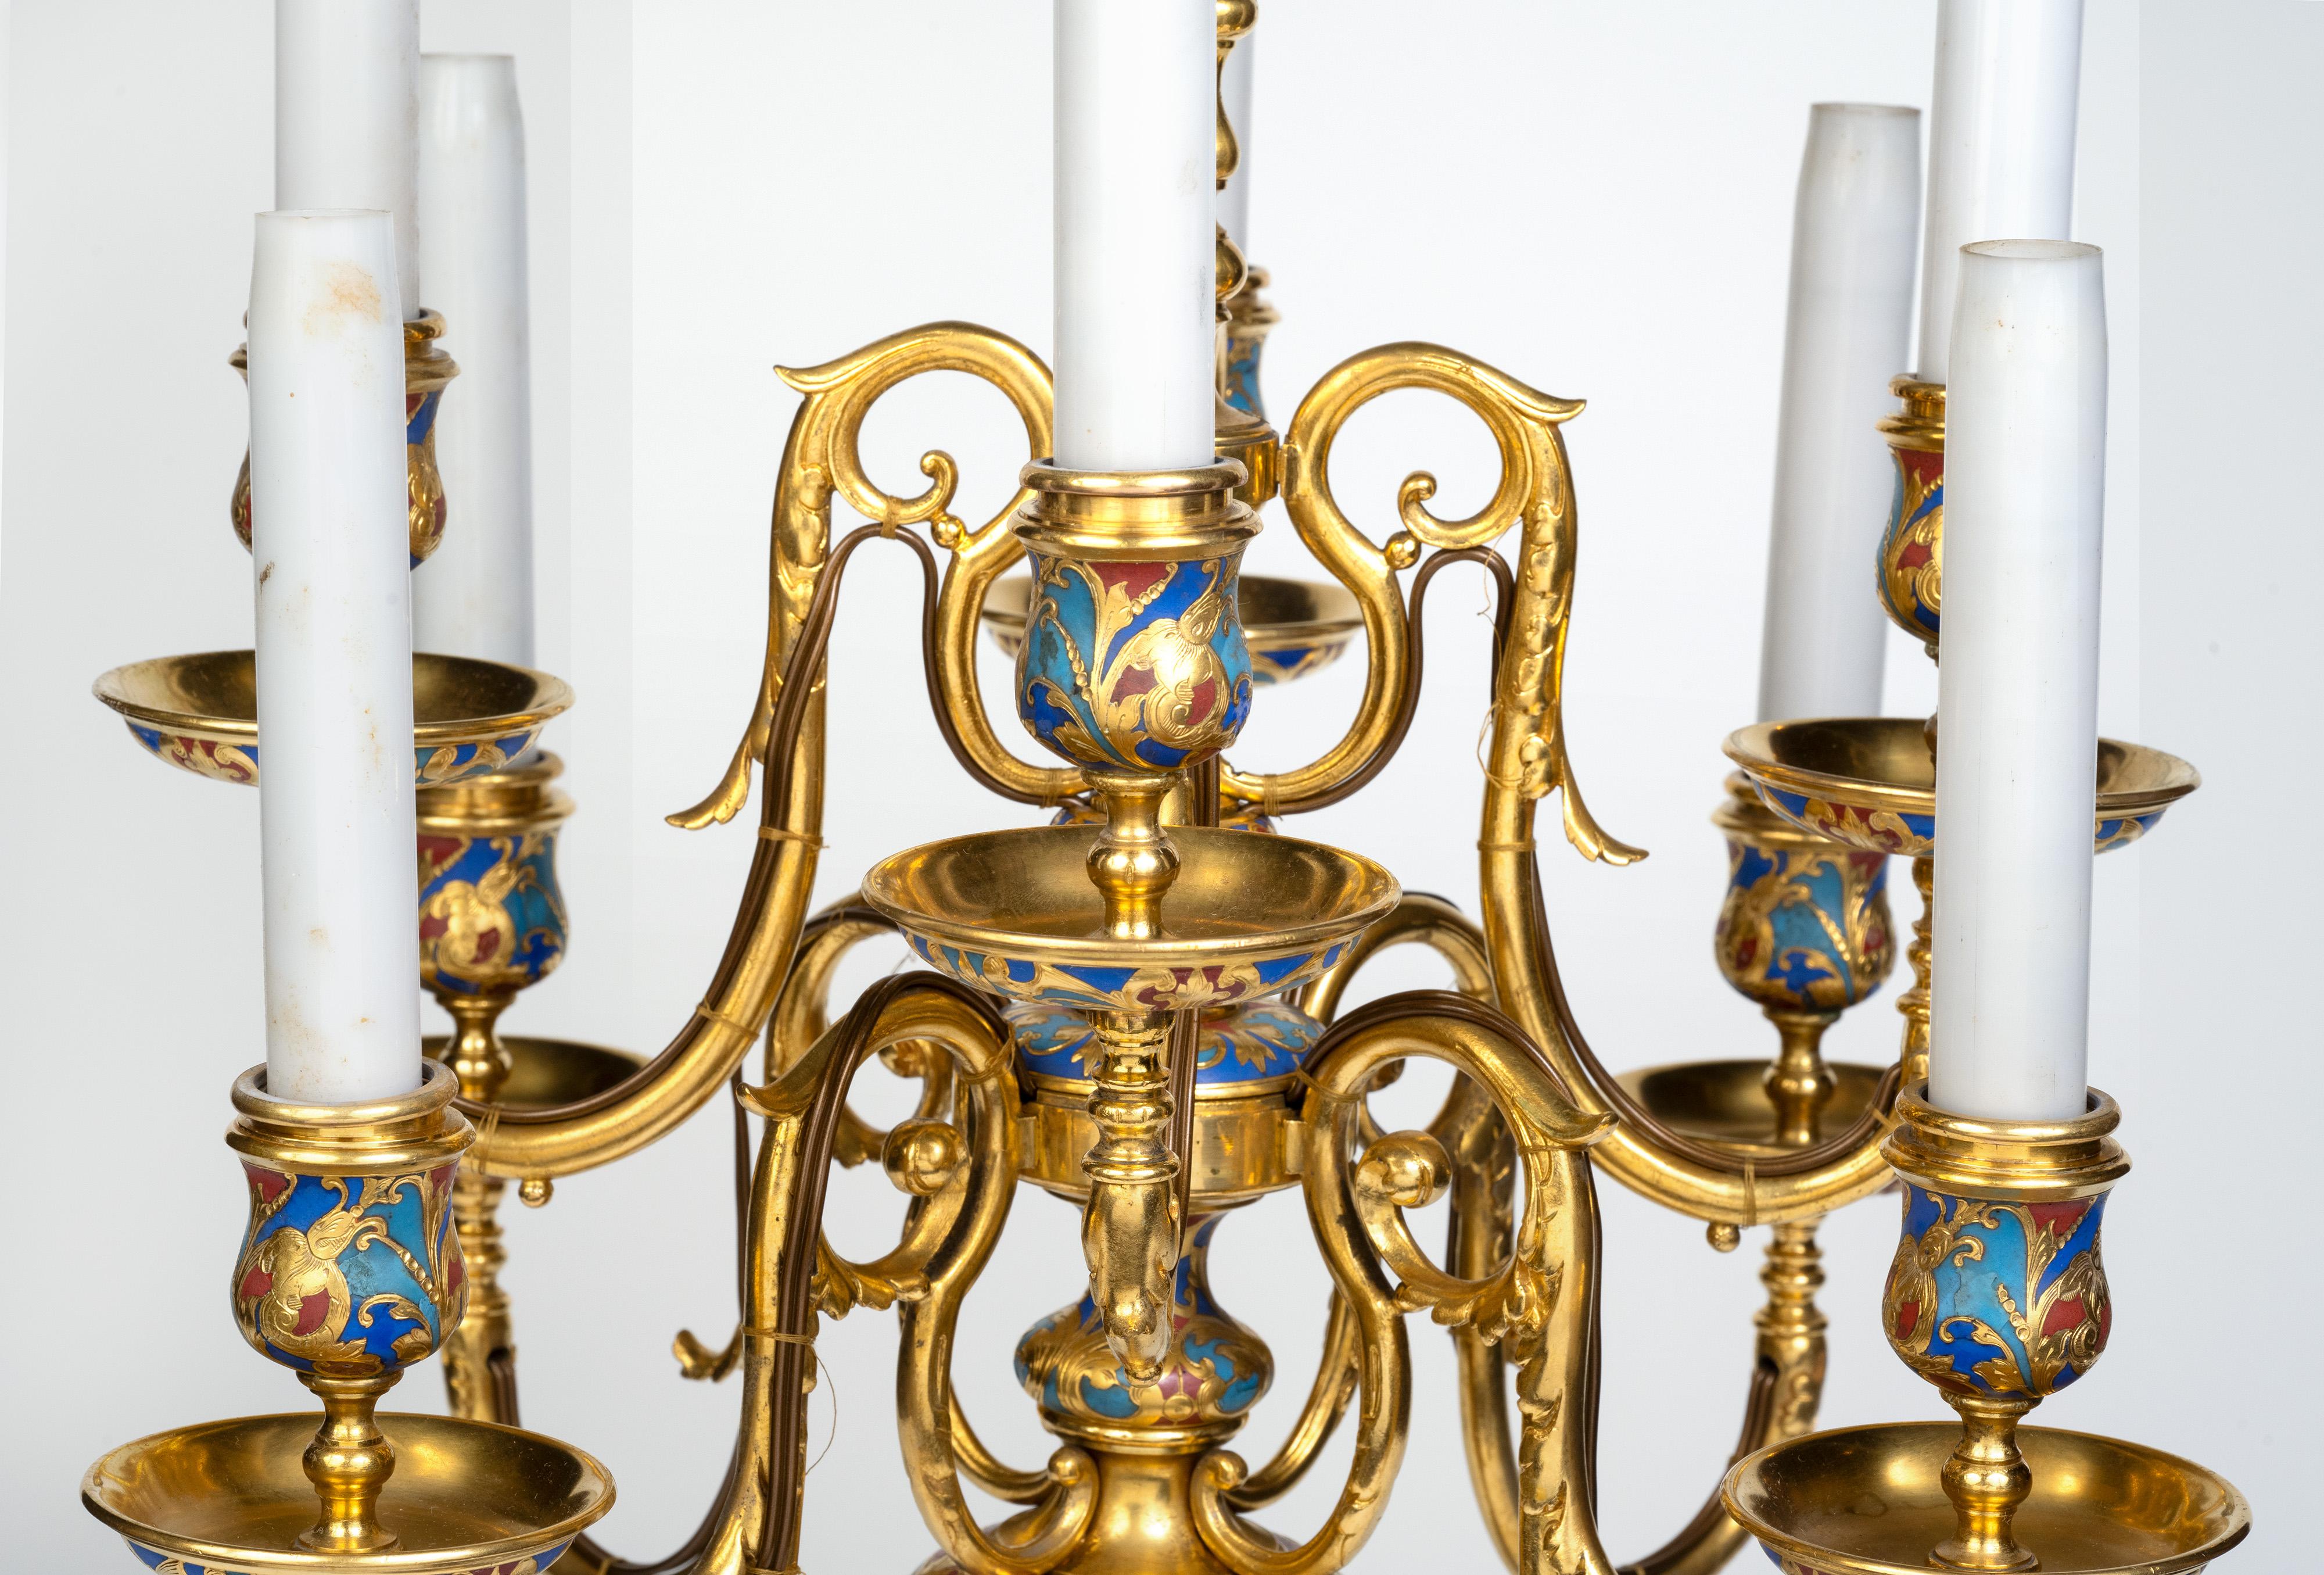 An Exceptional Pair of Champleve Enamel Ormolu Candelabra by Sevin & Barbedienne For Sale 3